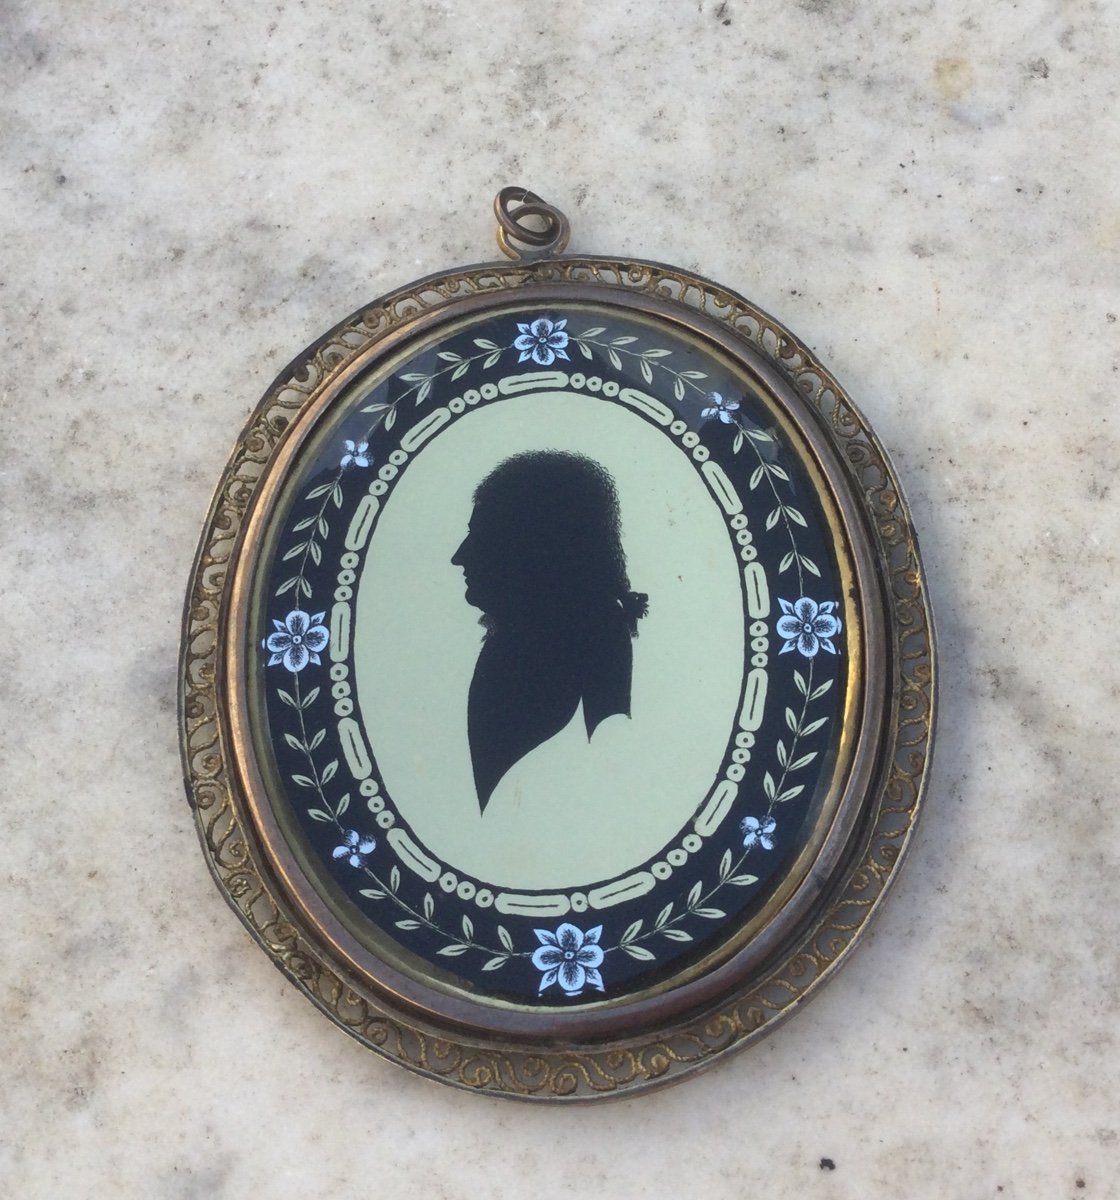 Silhouette In Oval Medallion, Early 19th Century